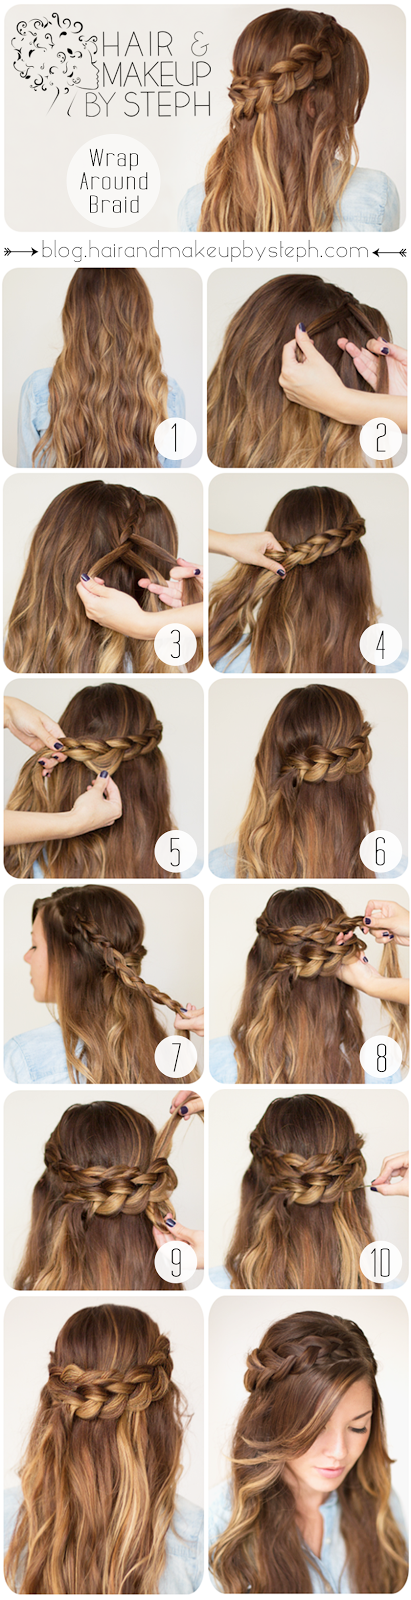 20 Cute and Easy Hairstyle Ideas and Tutorials (4)